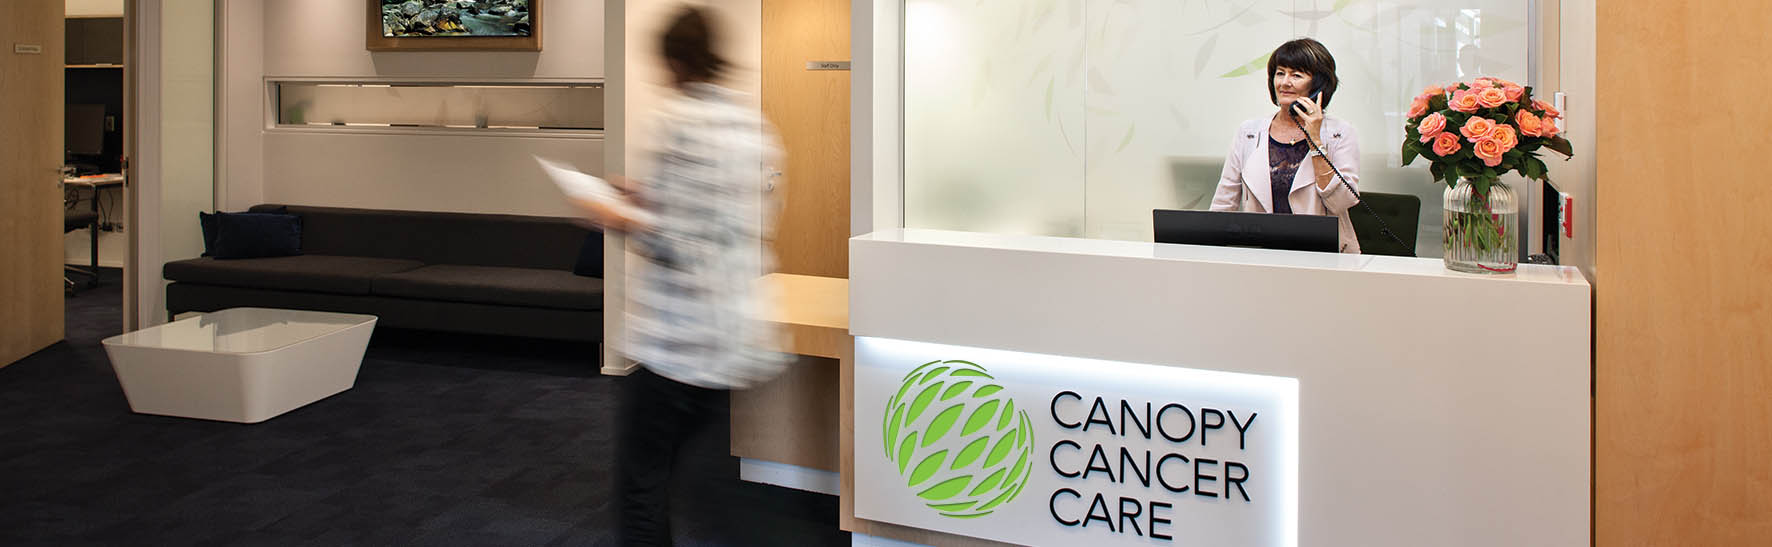 Canopy Cancer Care opens new clinic